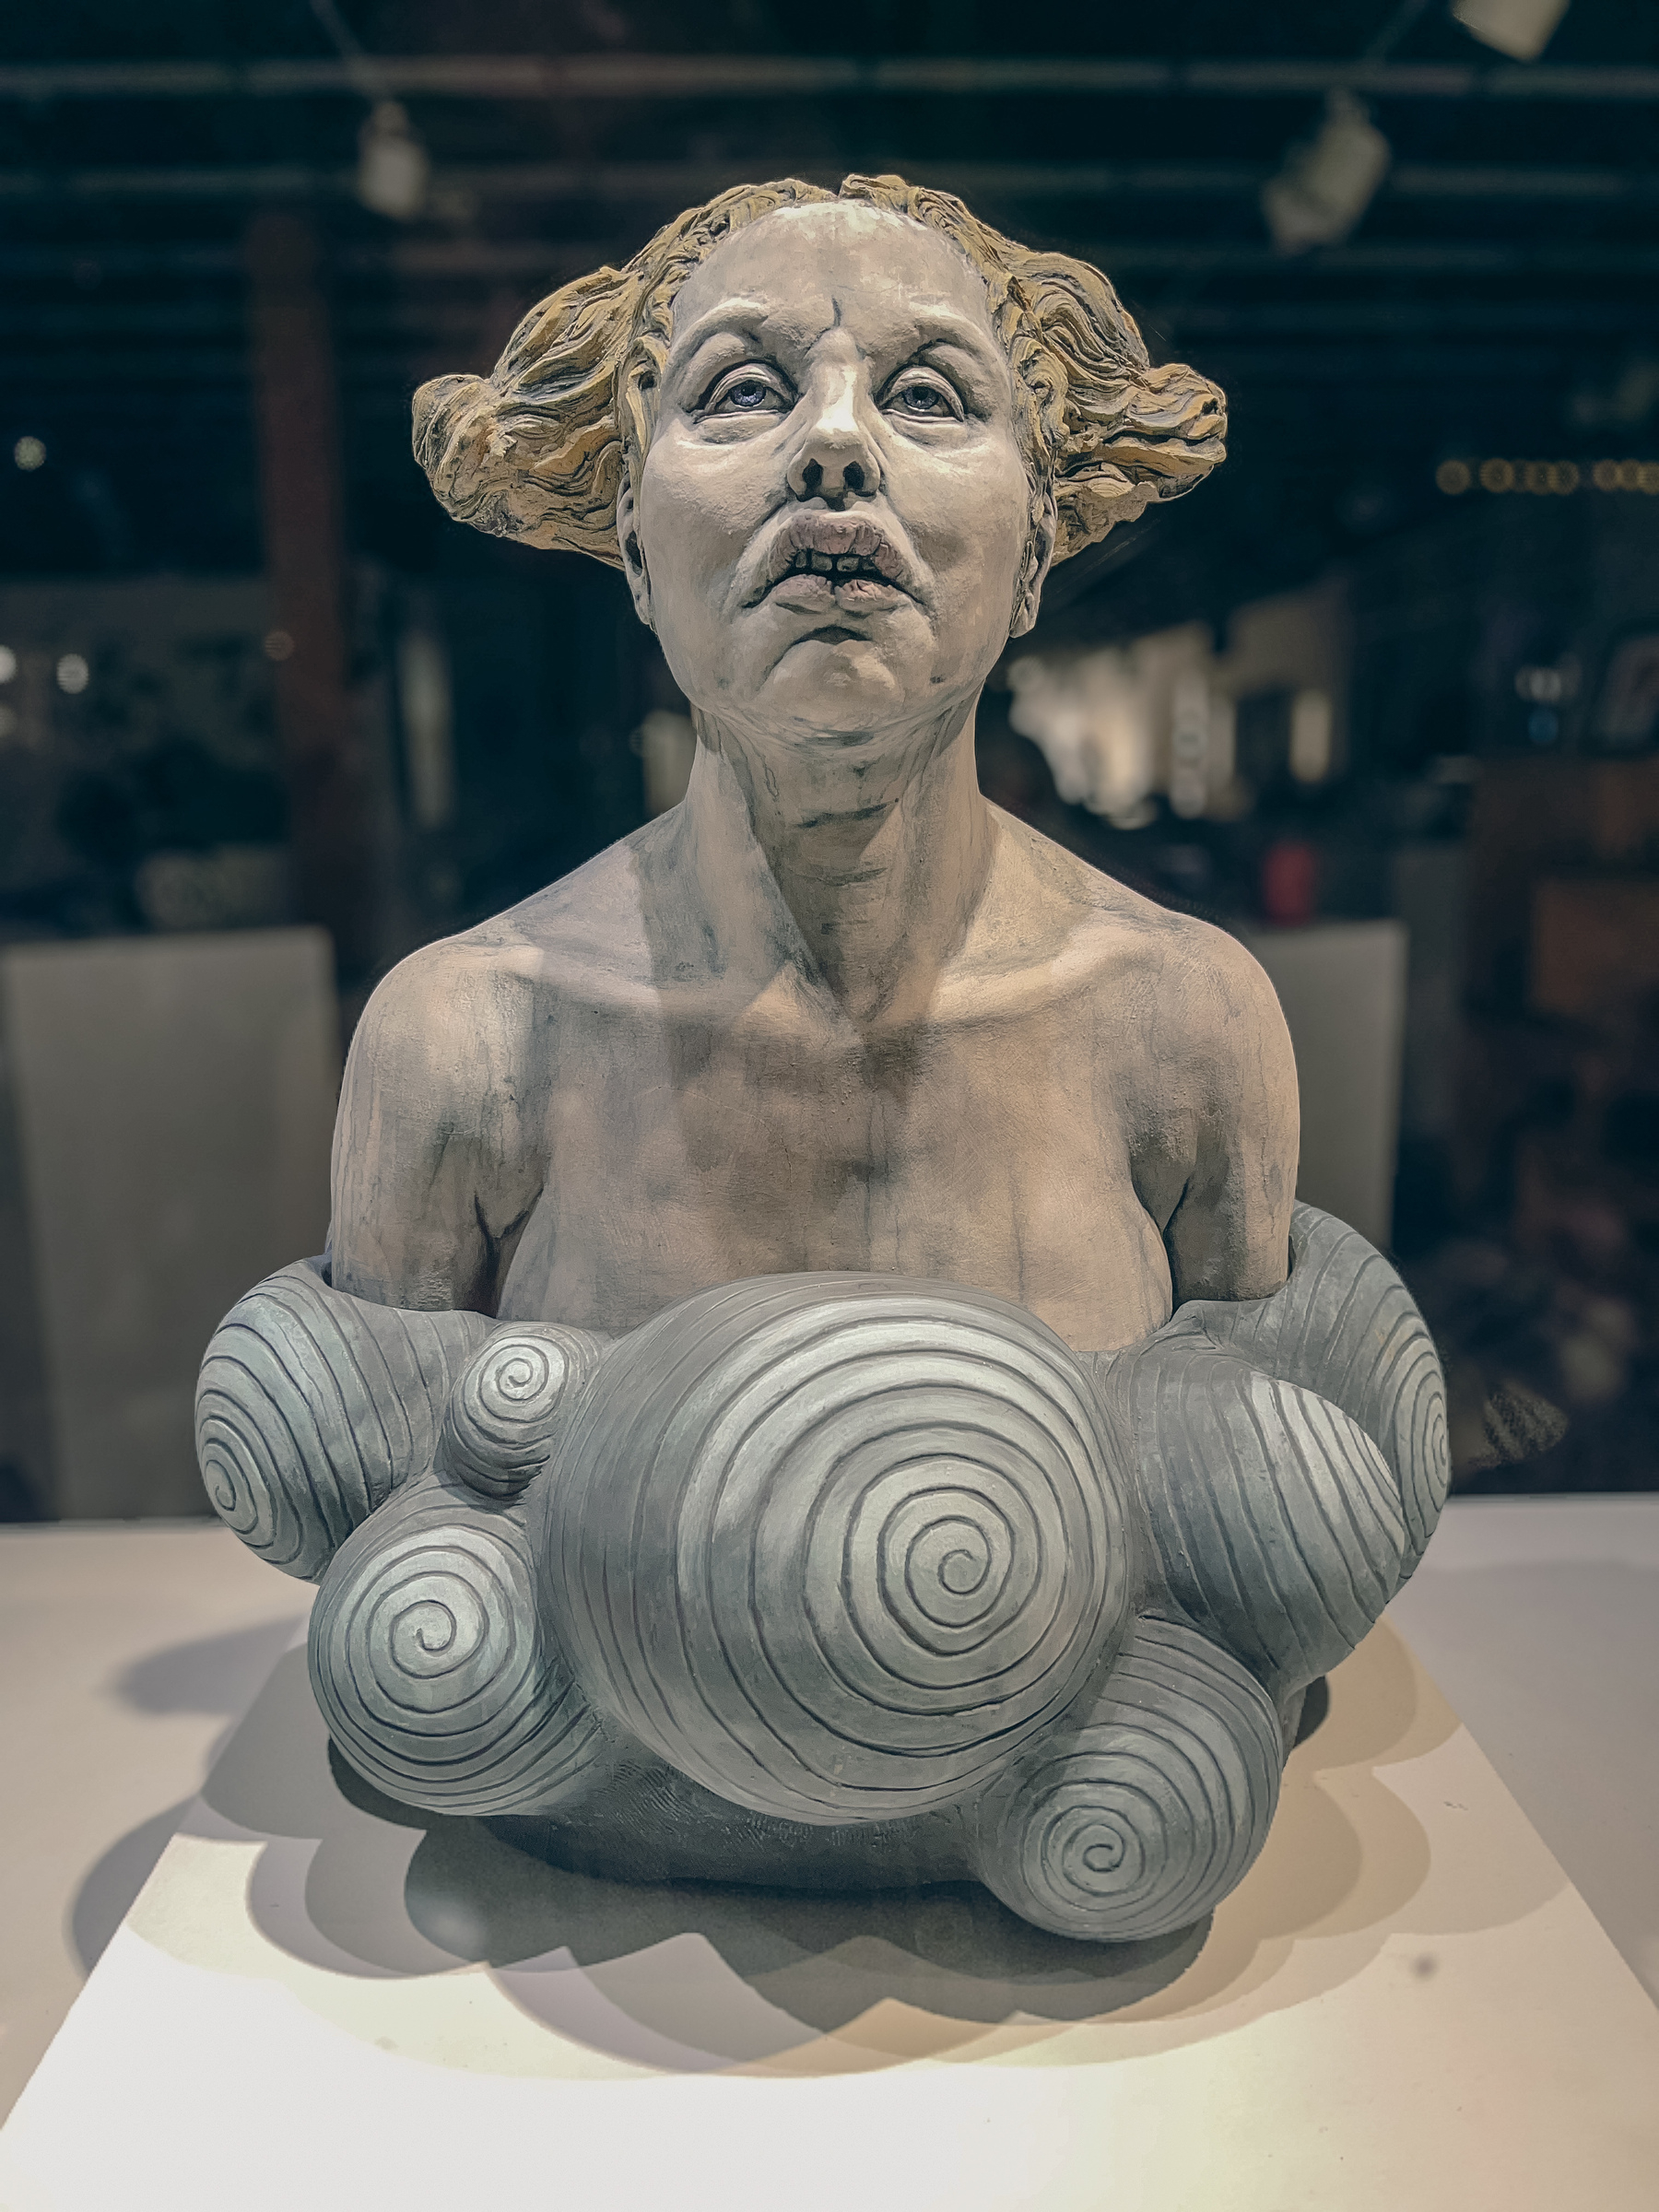 Funny clay sculpture of a woman in an art gallery window.